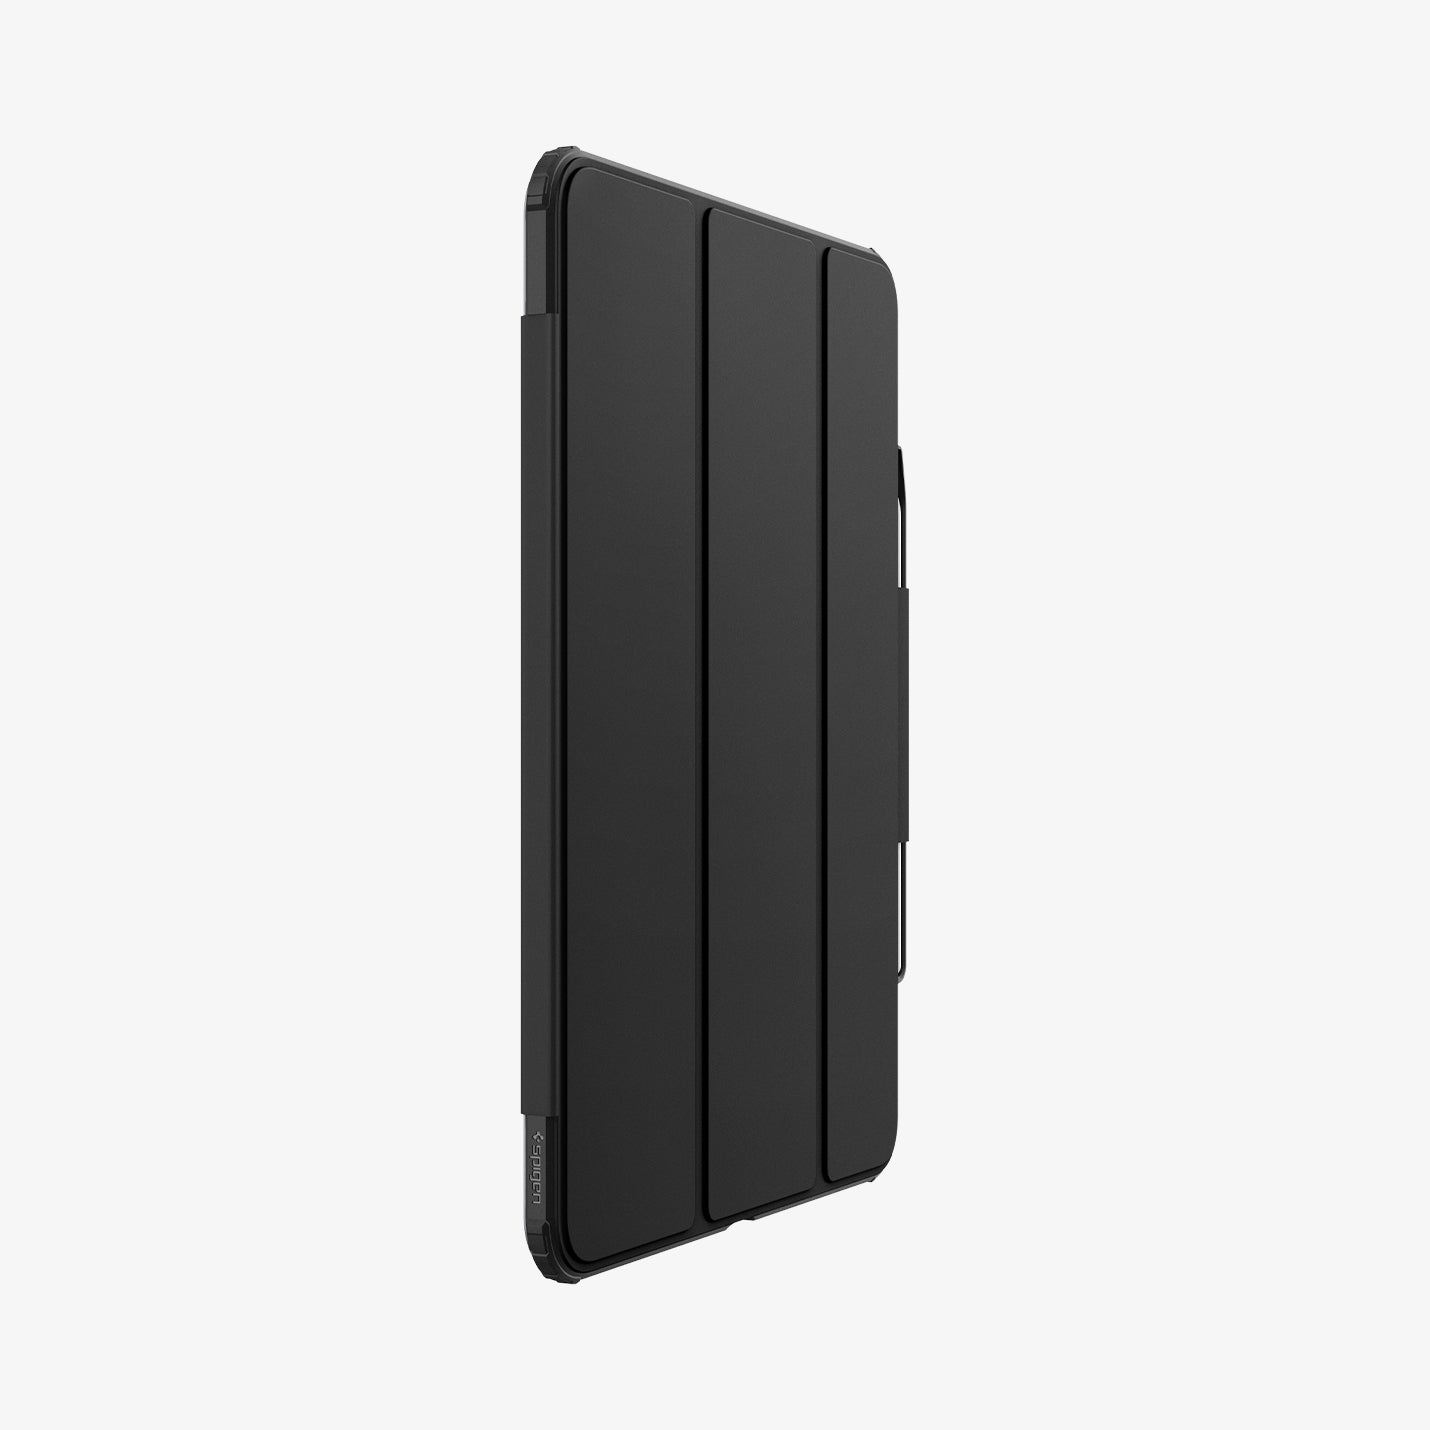 ACS07006 - iPad Pro 12.9-inch Case Ultra Hybrid Pro in Black showing the front and partial side